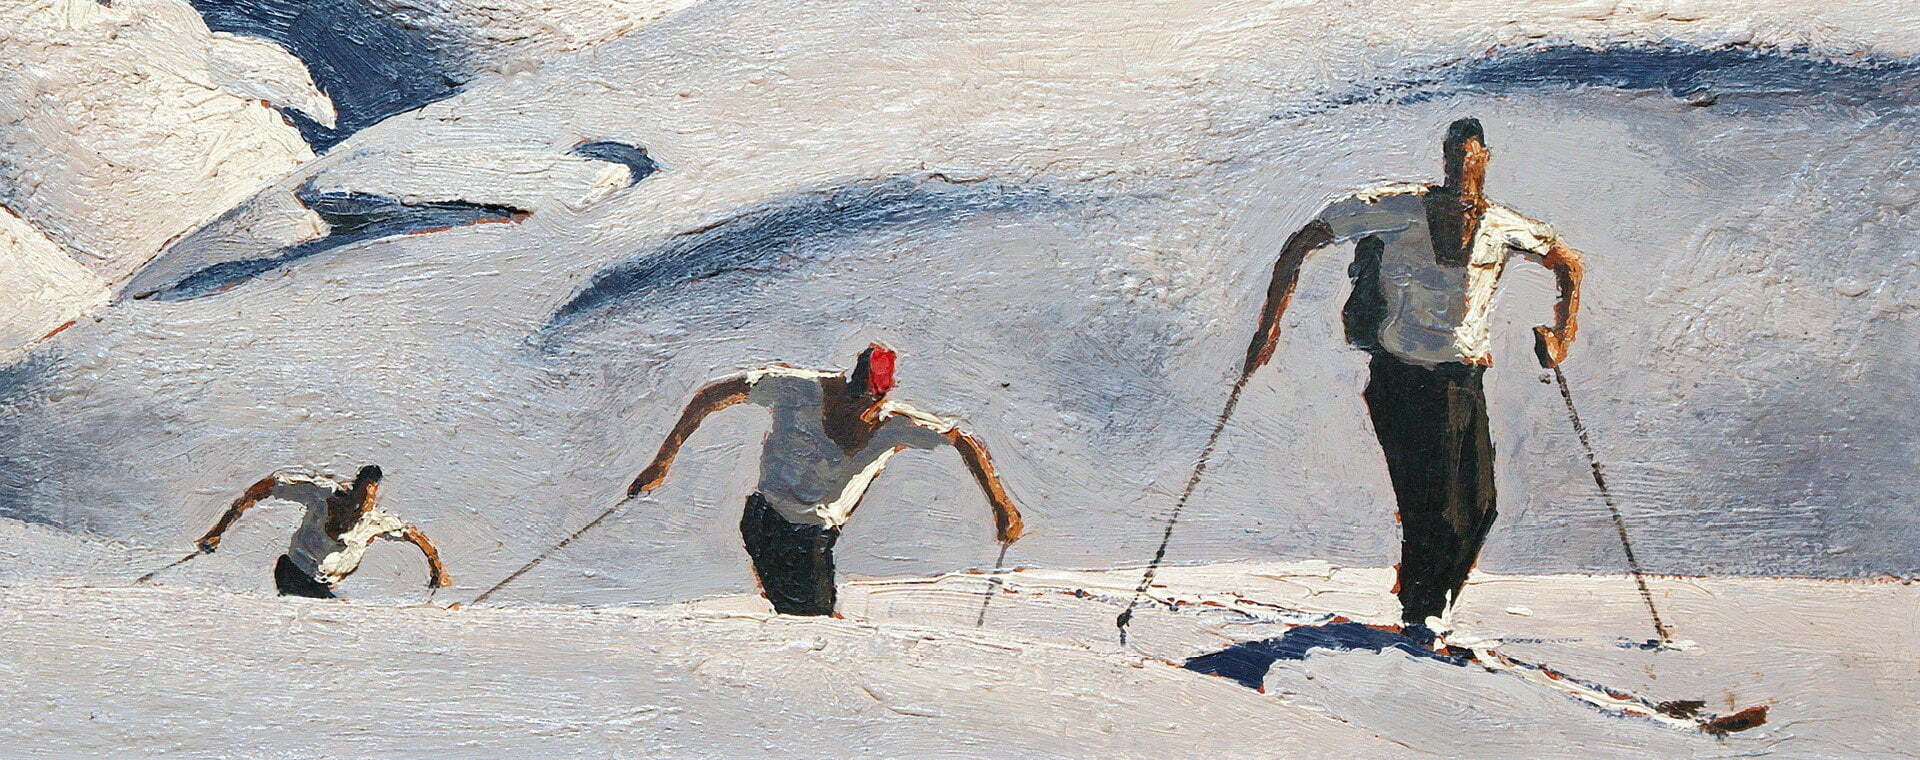 Ascent of Skiers (detail)